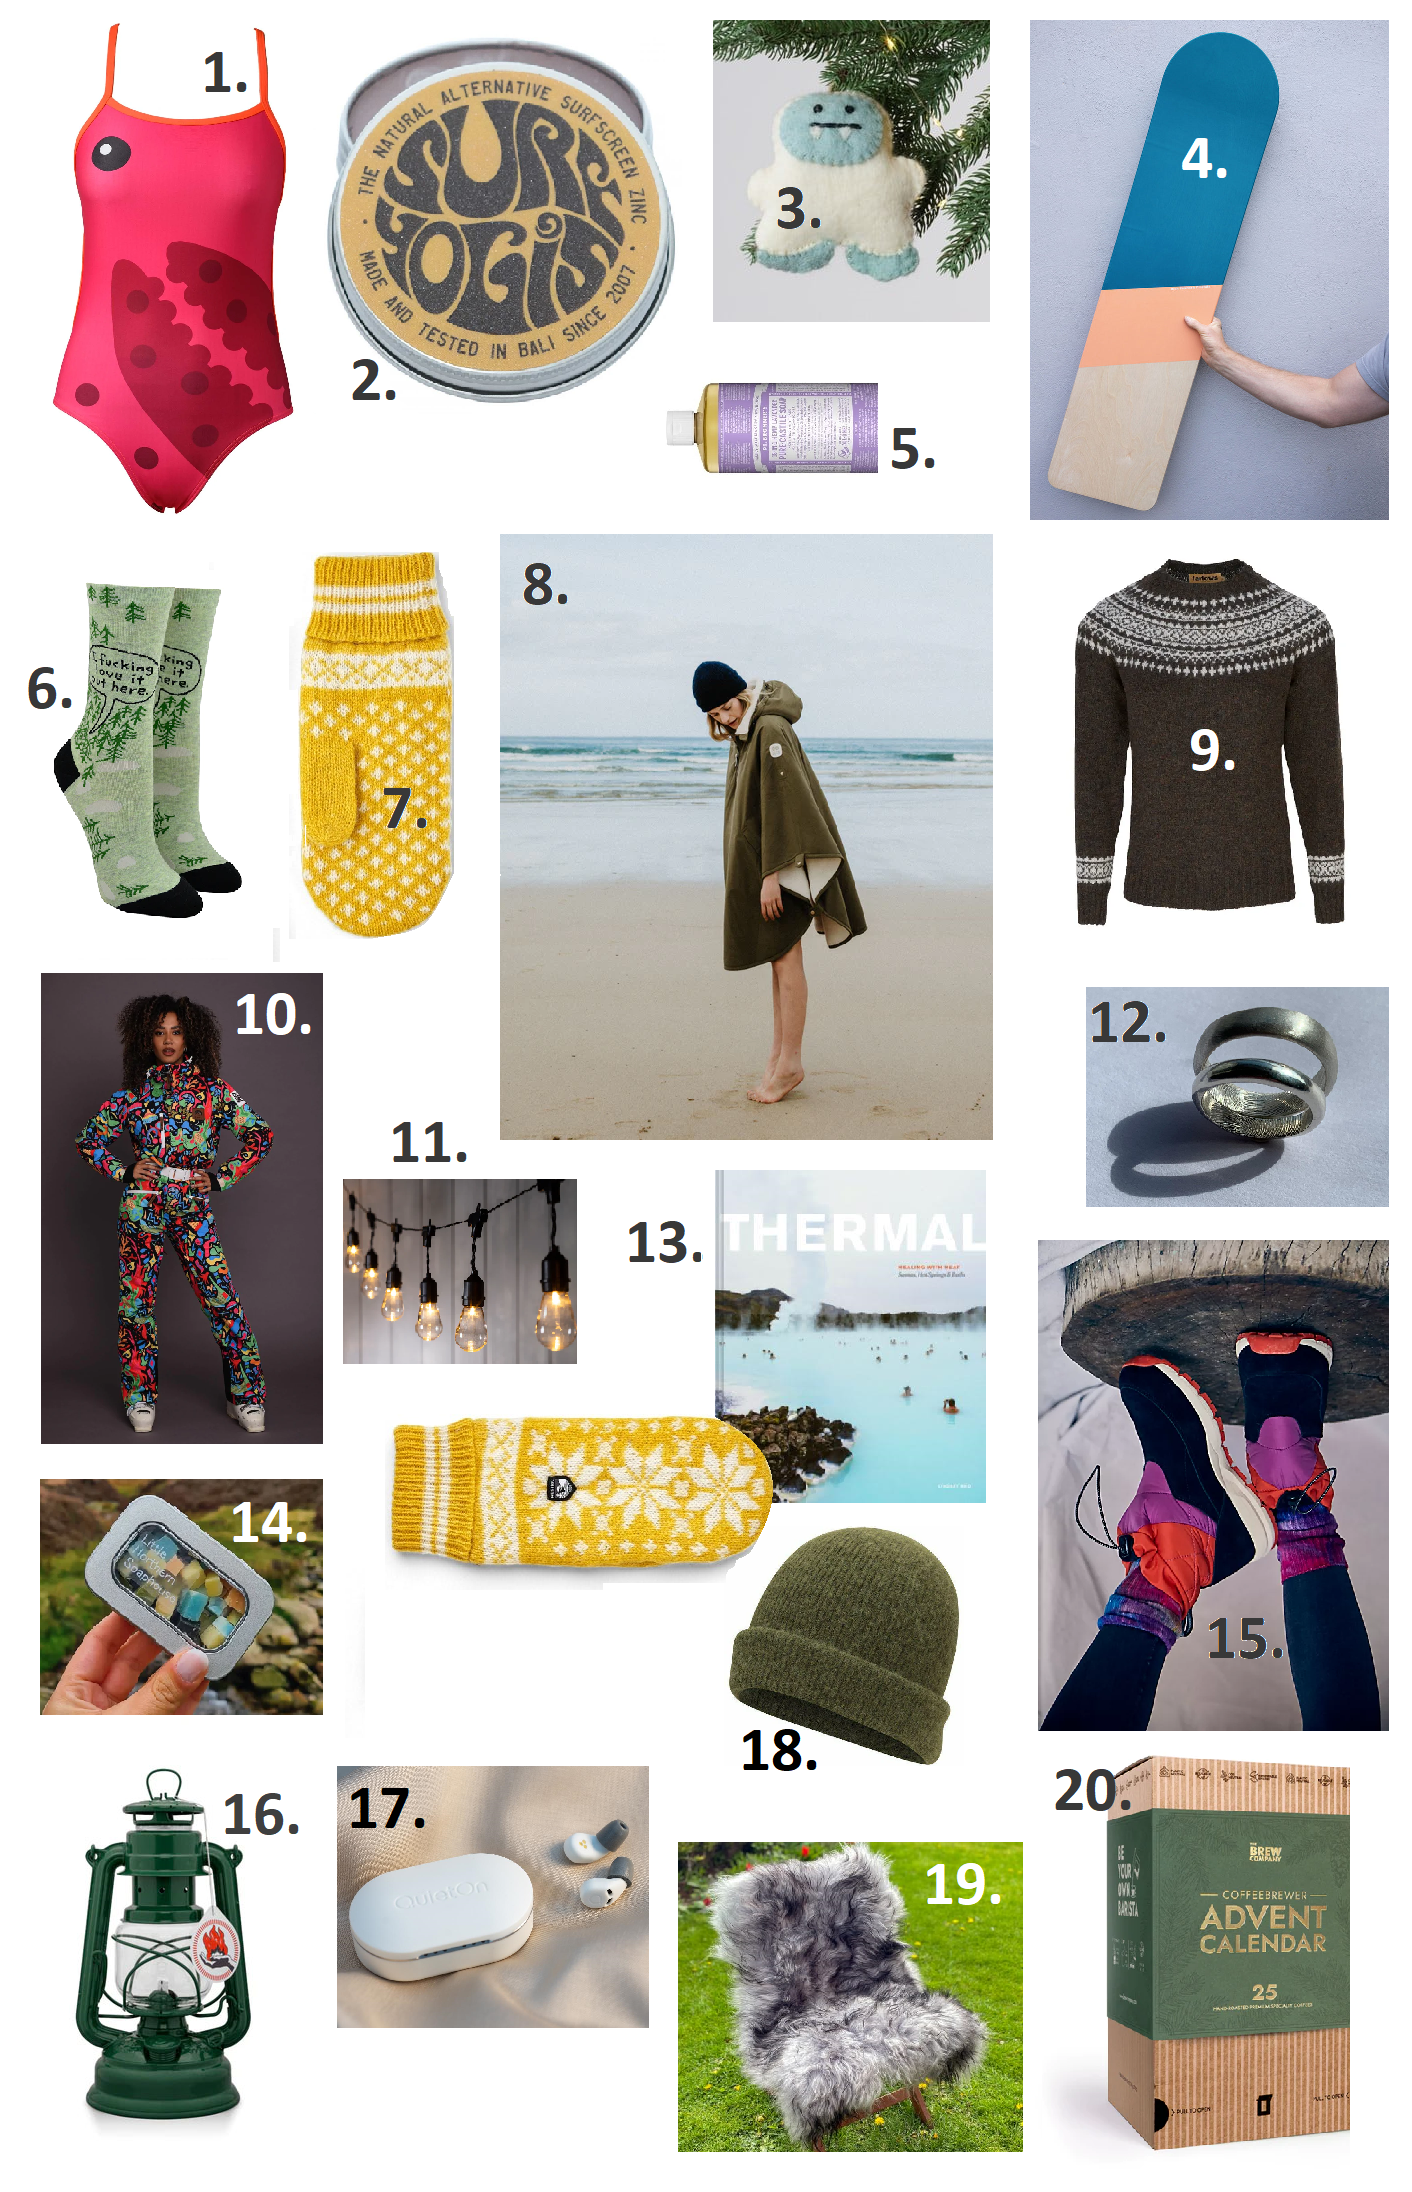 Image: Fashion, Travel and Gift Guide